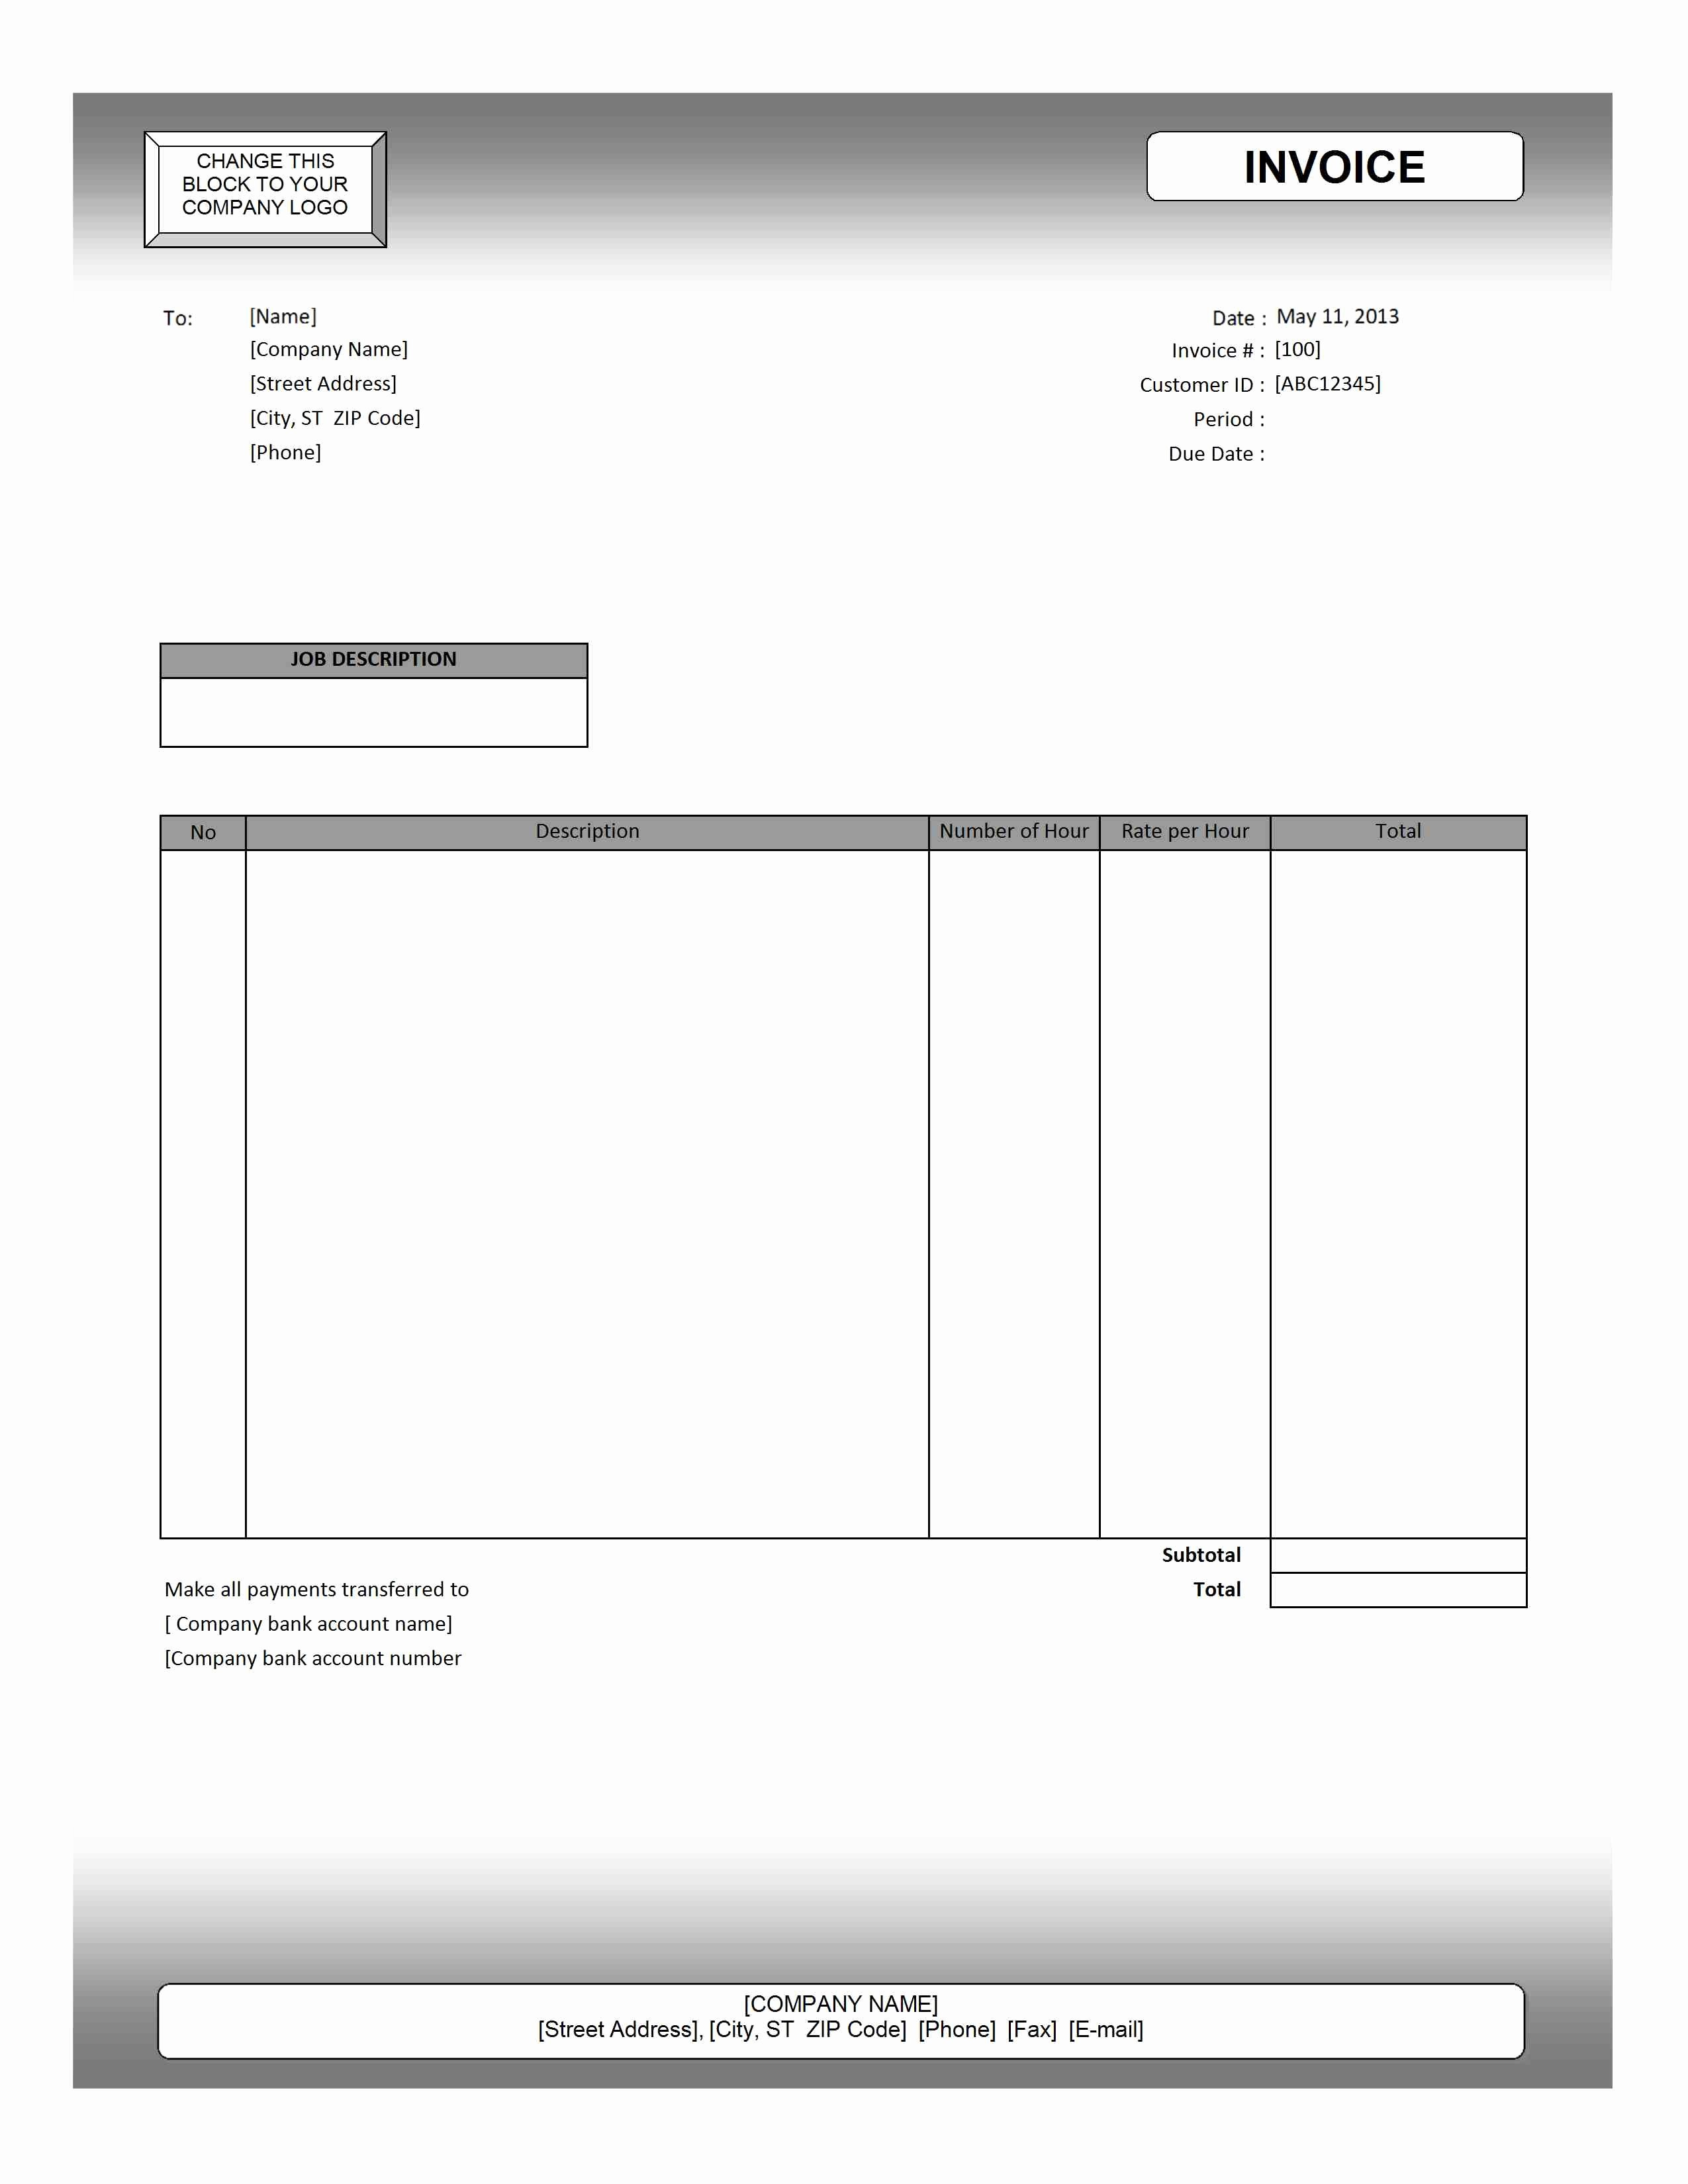 Excel  Invoice Template  Letsgonepal within Excel 2013 Invoice Template